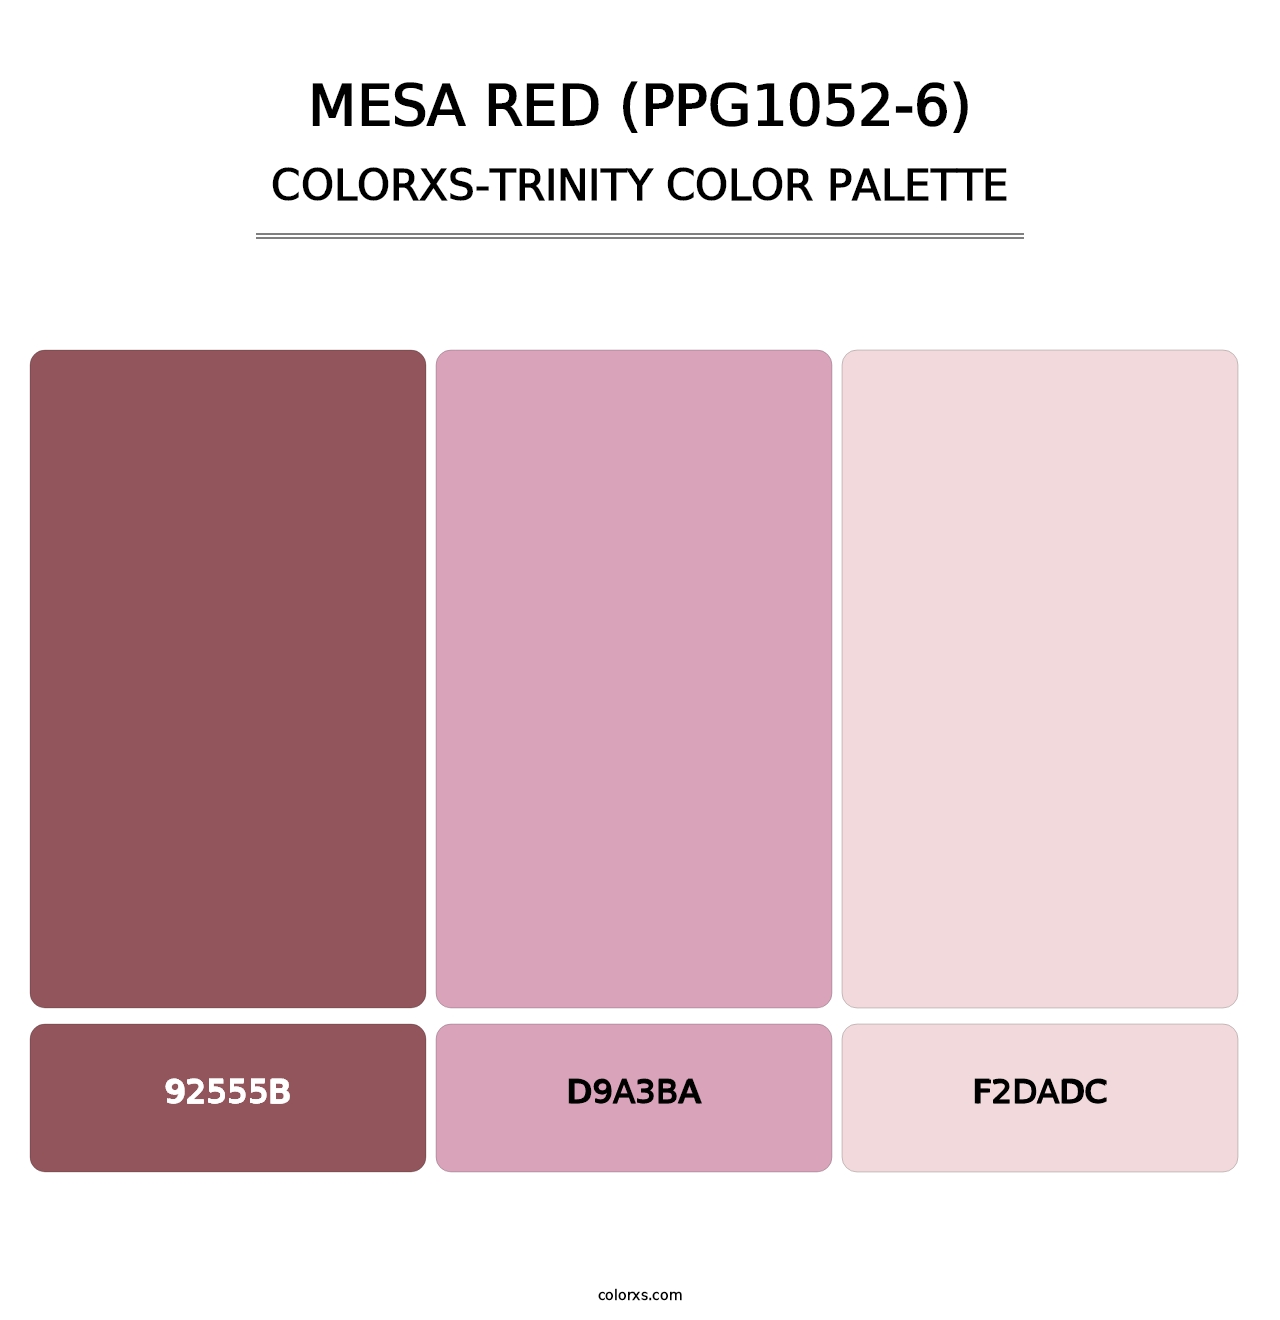 Mesa Red (PPG1052-6) - Colorxs Trinity Palette